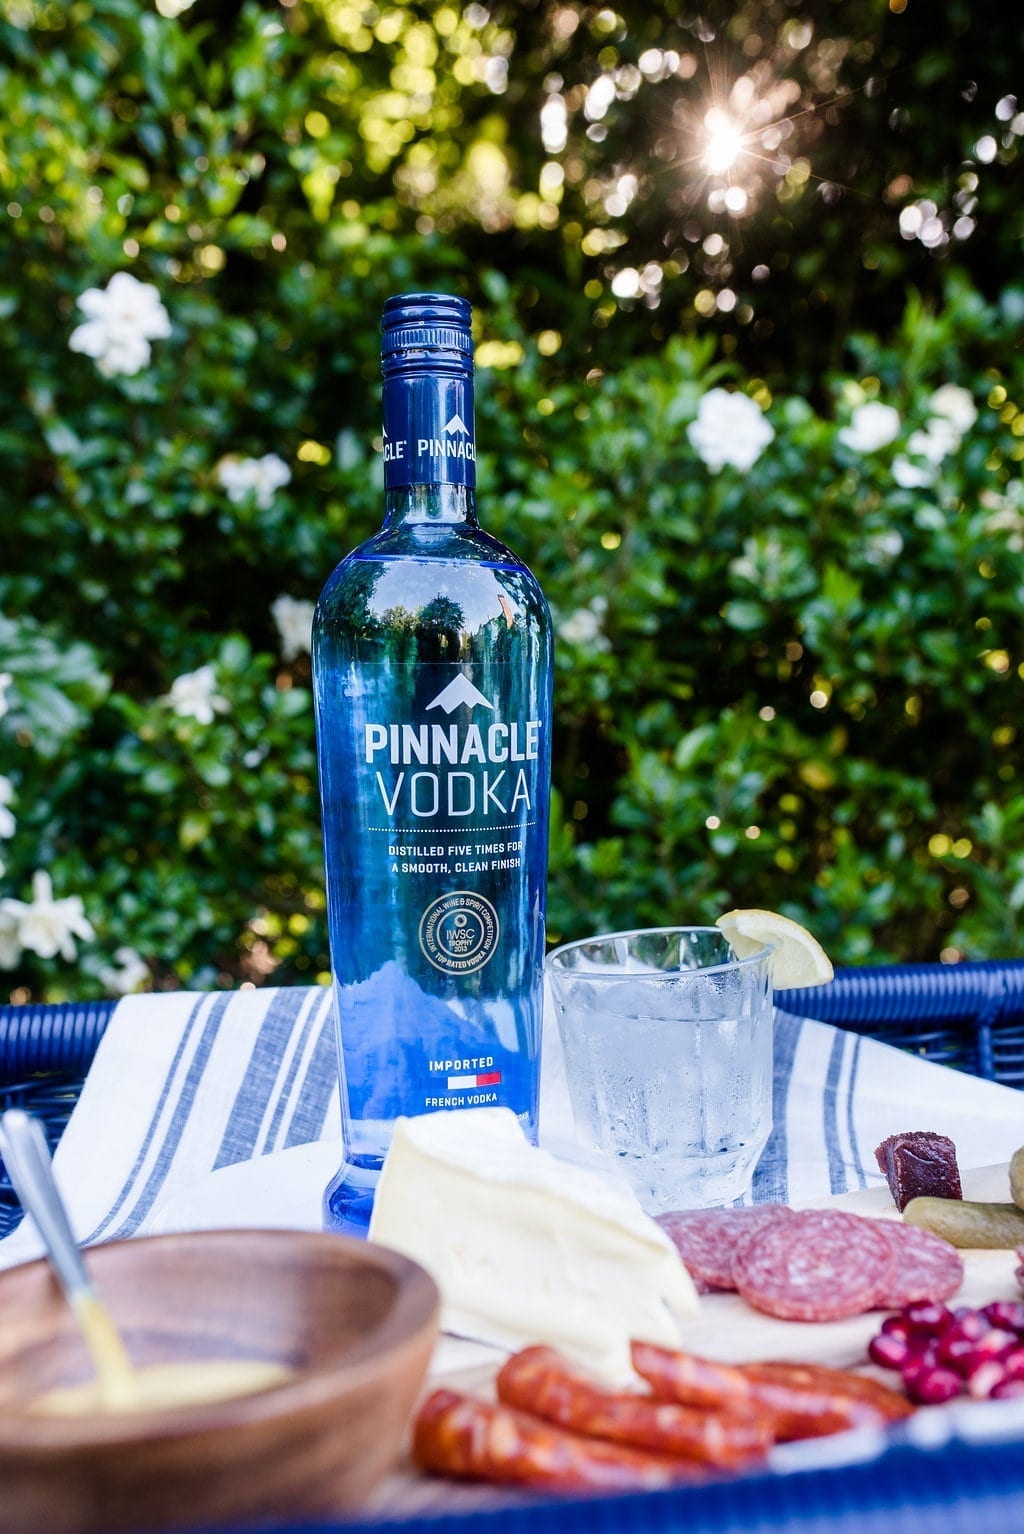 Review of Pinnacle Vodka. French Vodka and party tips for garden party.